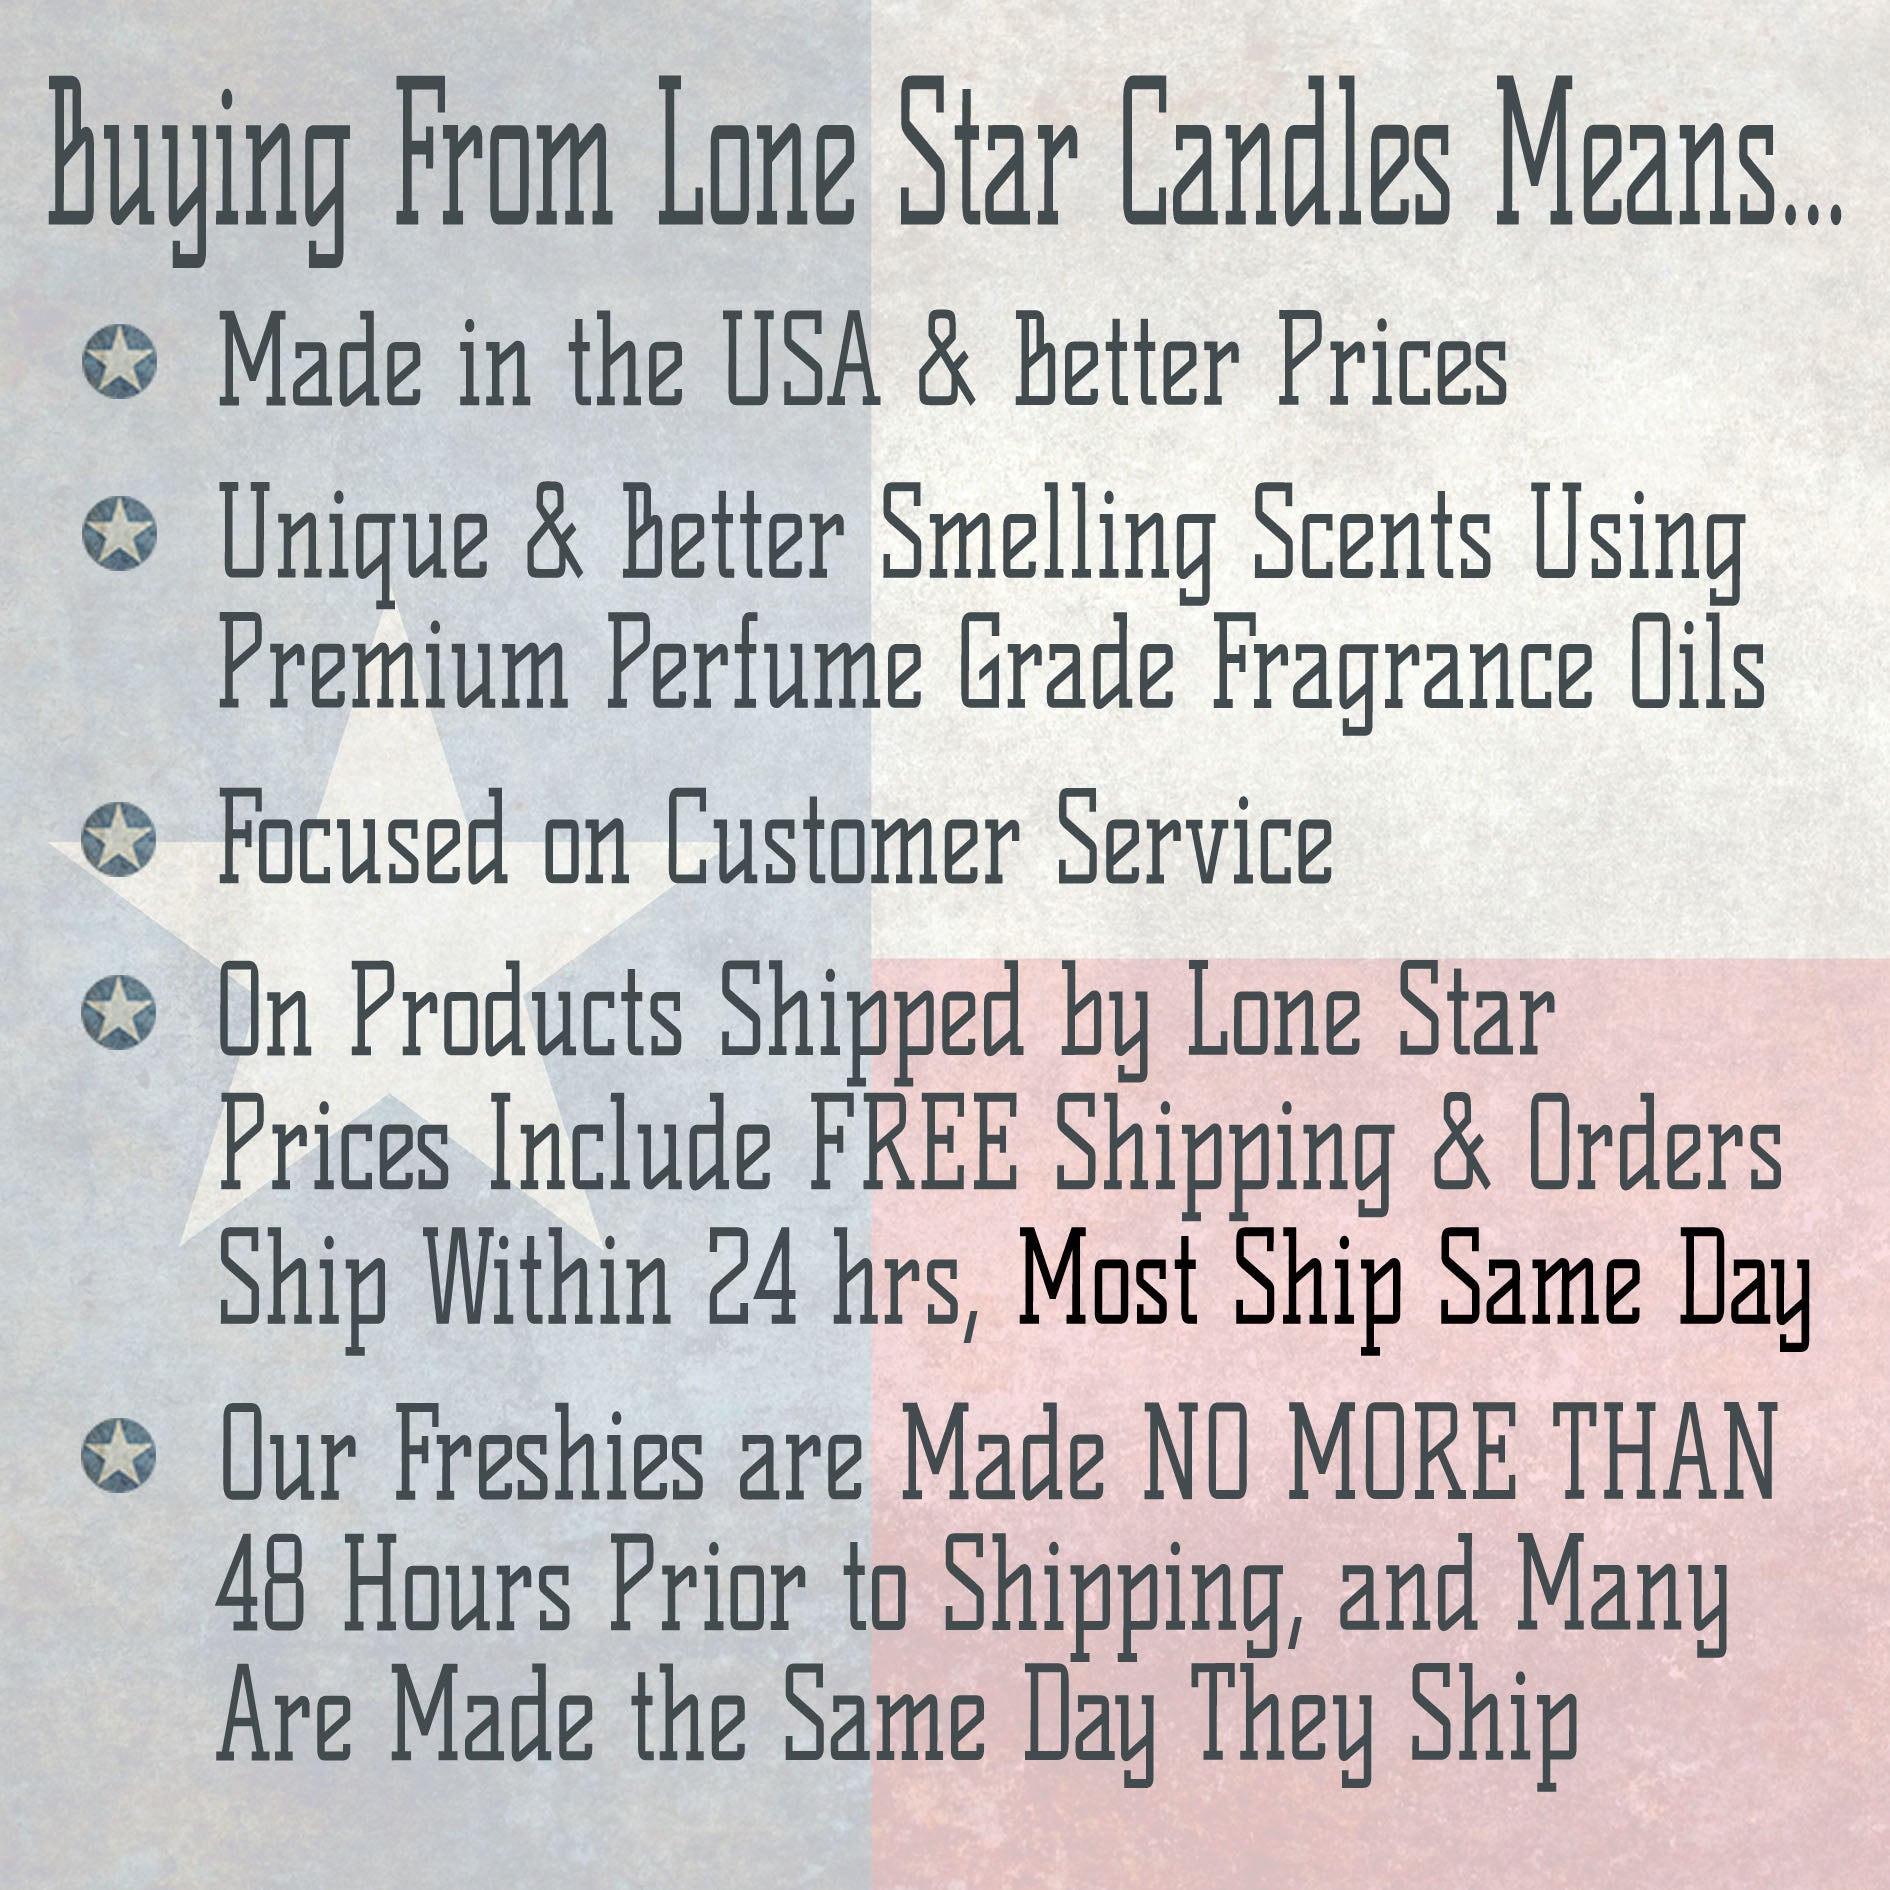 Strawberry Leather, Lone Star Candles & More's Premium Strongly Scented Freshies, Genuine Leather Aroma with Sweet & Juicy Strawberries, Car & Air Freshener, USA & Texas Made, Chili Pepper 1-Pack